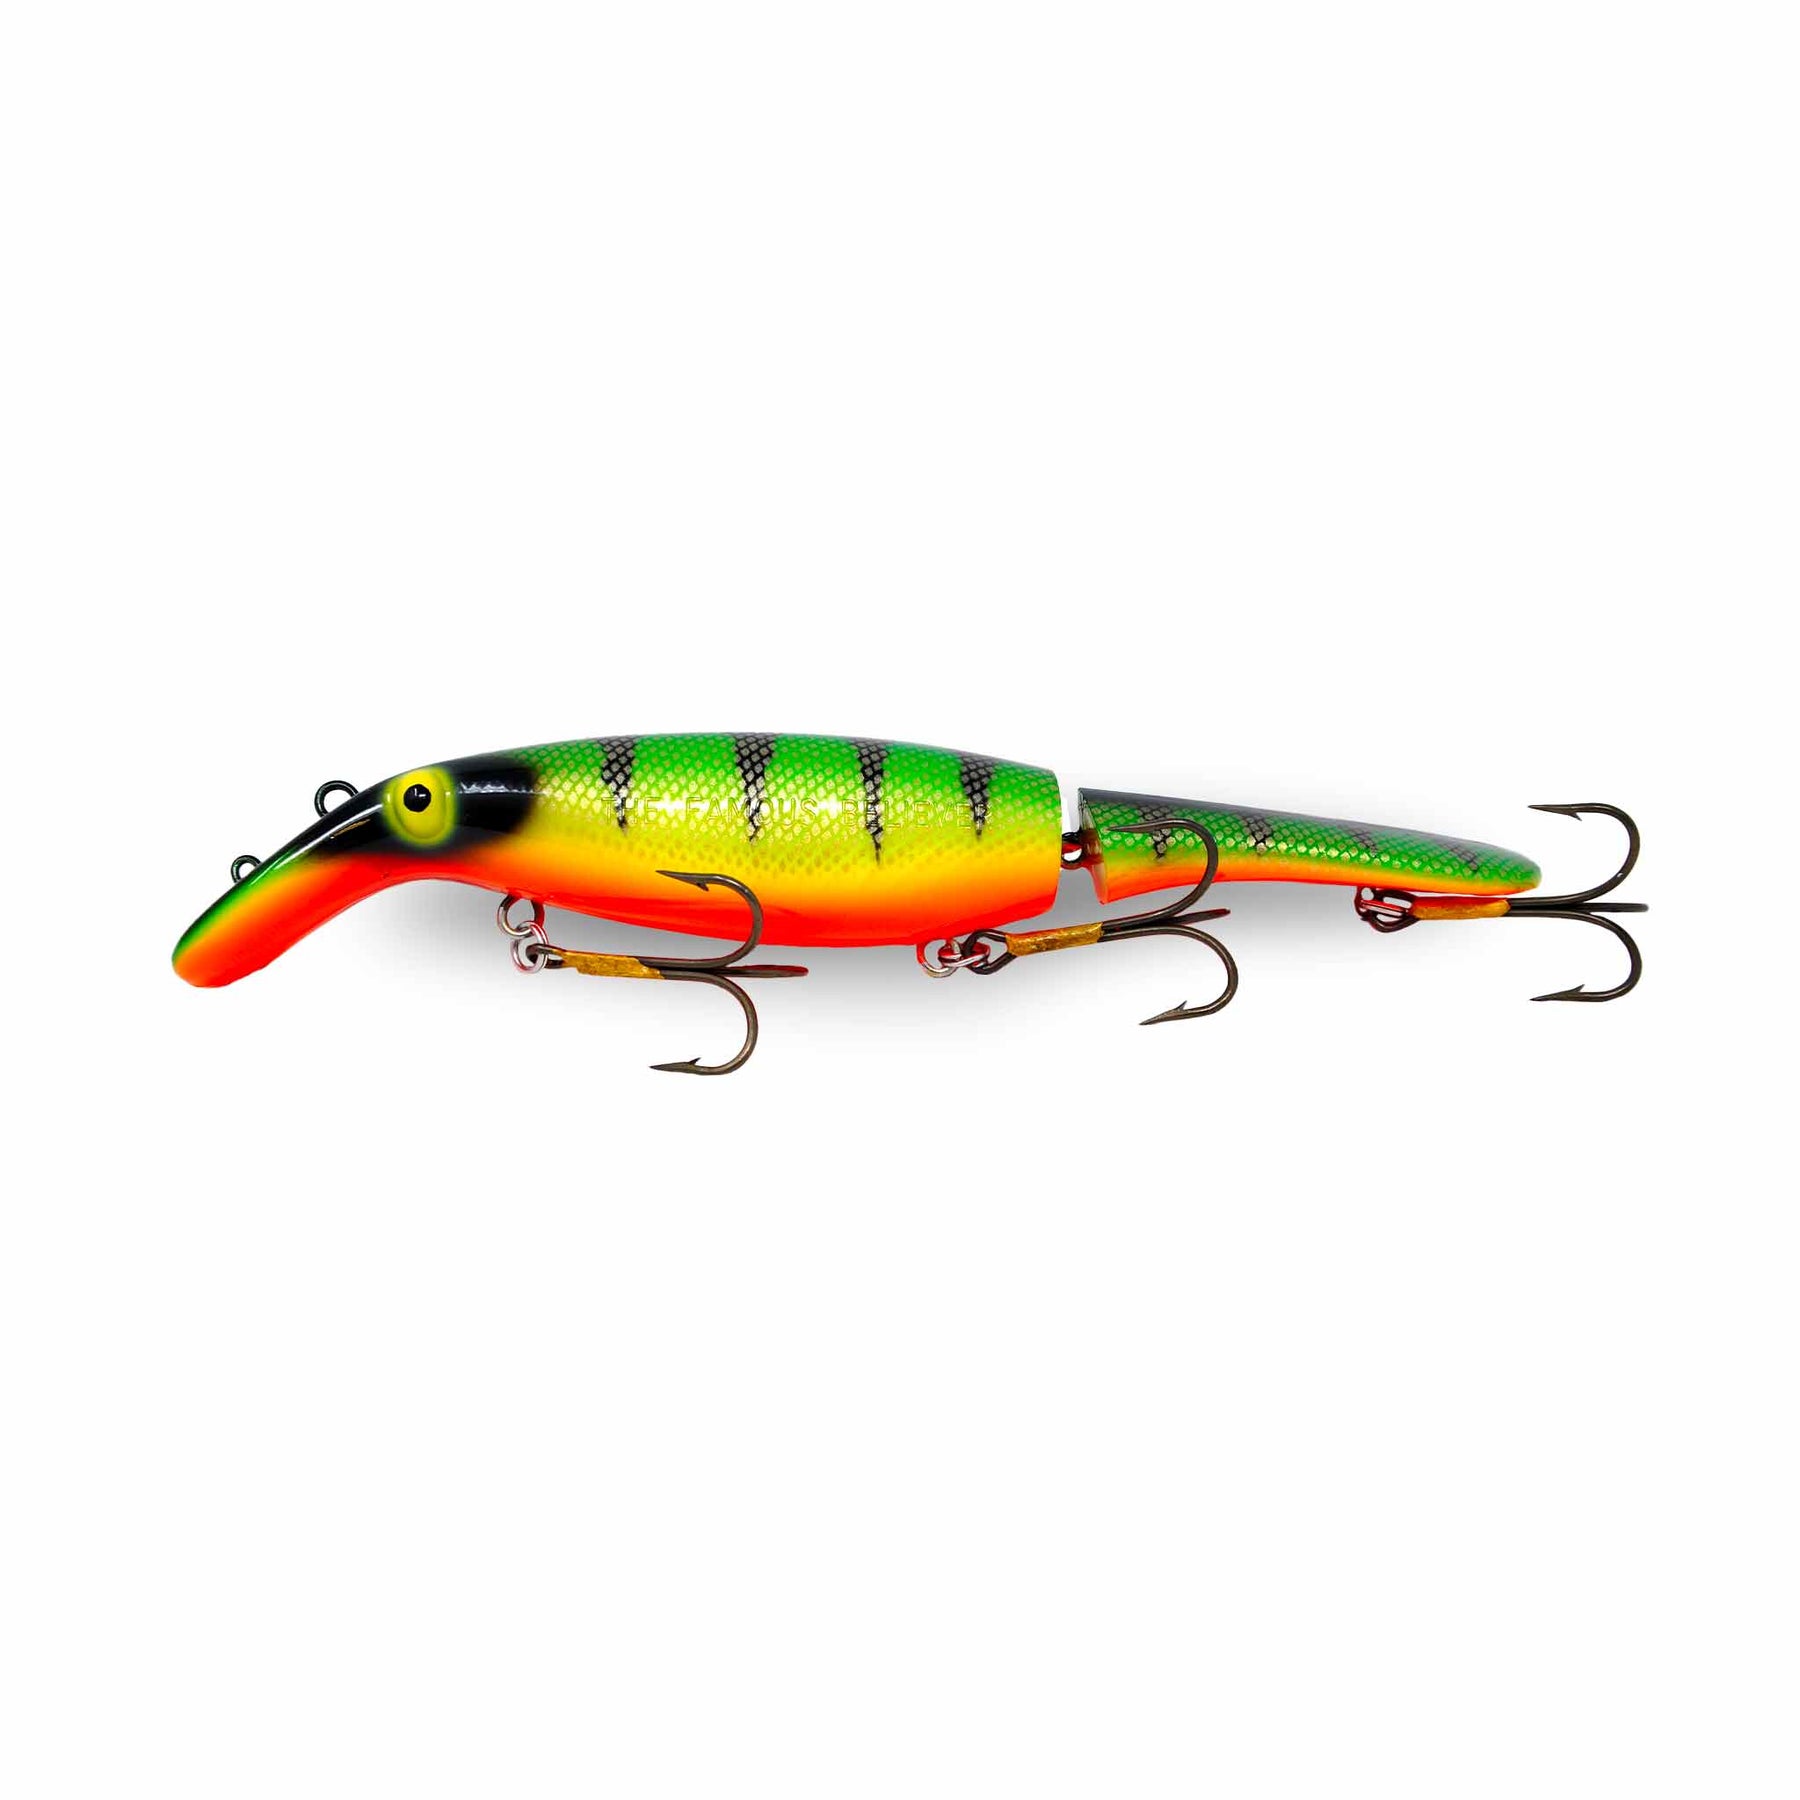 View of Crankbaits Drifter Tackle Believer Jointed 10" Crankbait Fire Perch available at EZOKO Pike and Musky Shop